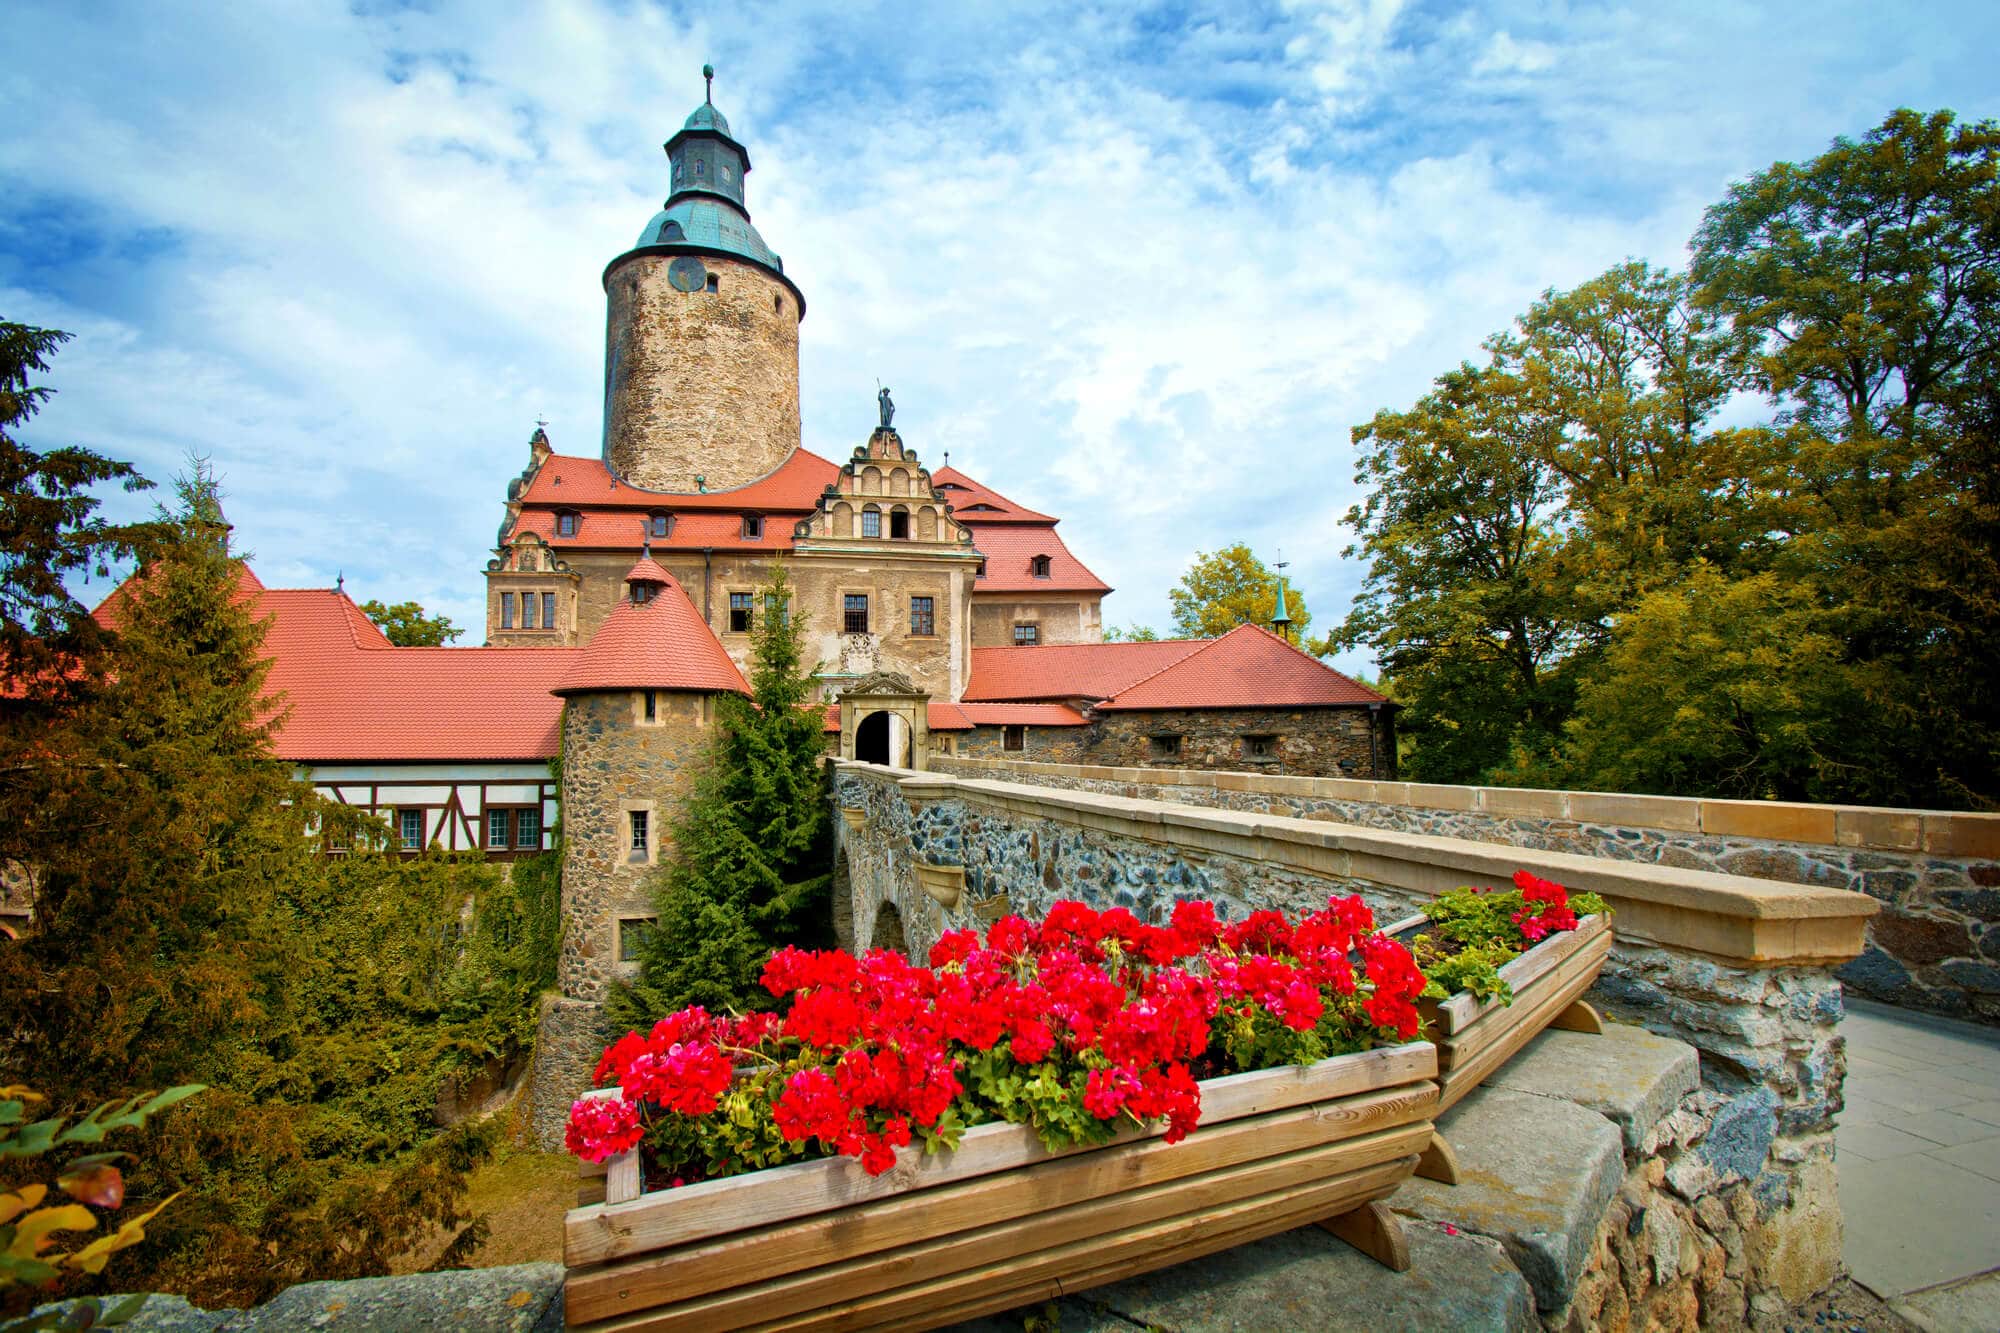 12 of the most beautiful castle in Poland you should add to your bucket list - Czocha Castle